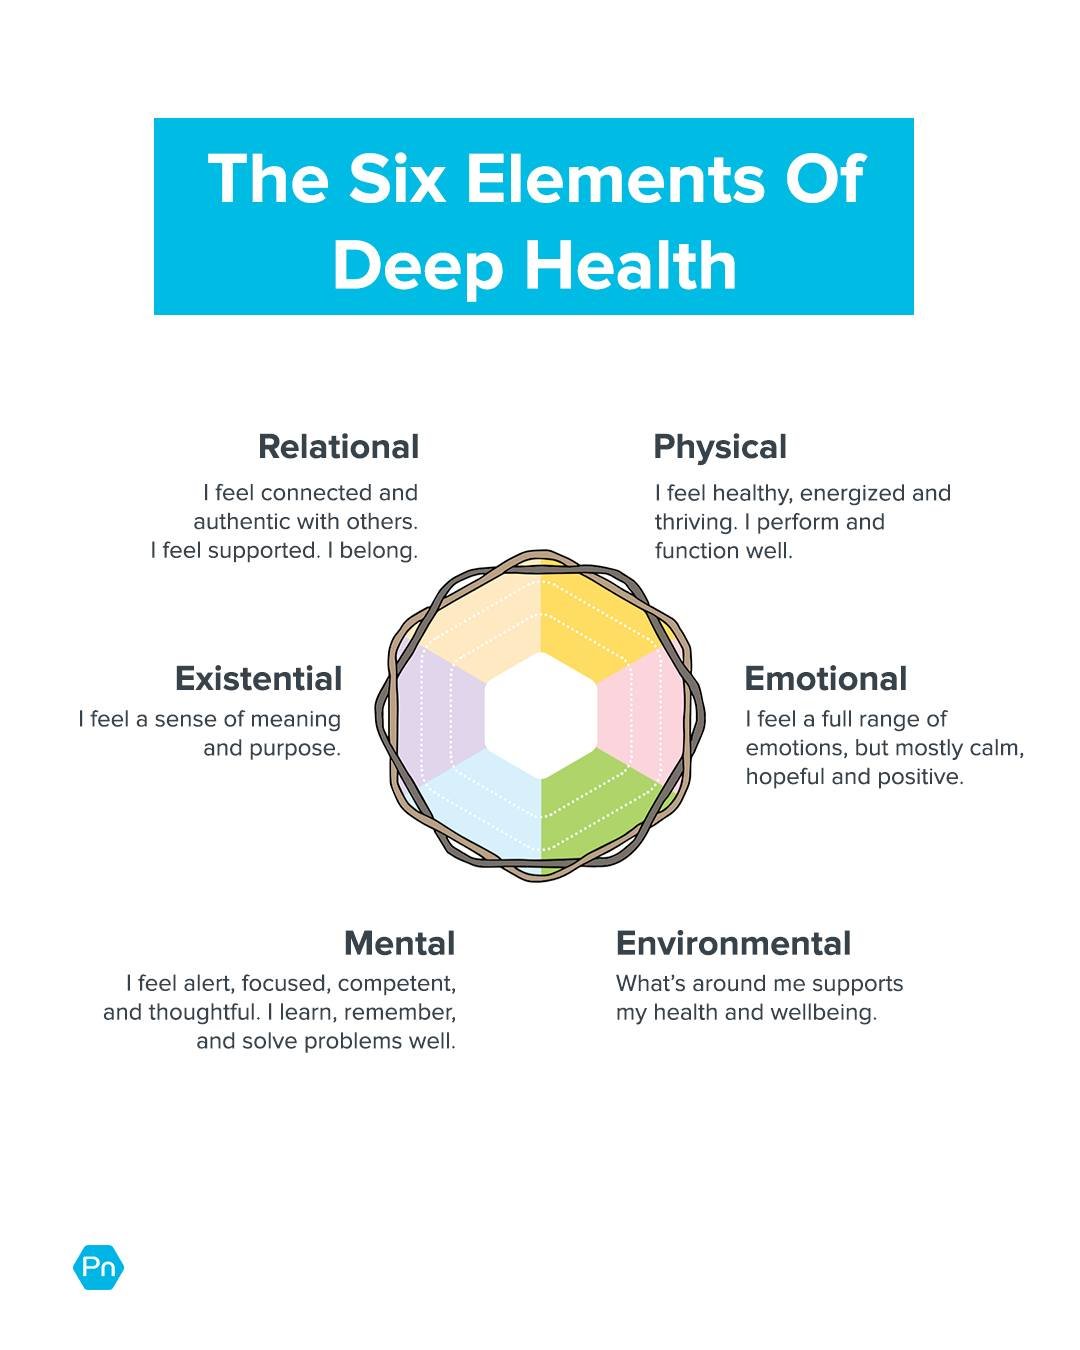 🧕When you coach for #deephealth (like I do), you consider the multi-dimensional aspects of a whole person in
their real life.⁣⁣
⁣
🤔 Not just body fat percentage and blood work, but also factors like how people think, feel, live, and connect to
othe